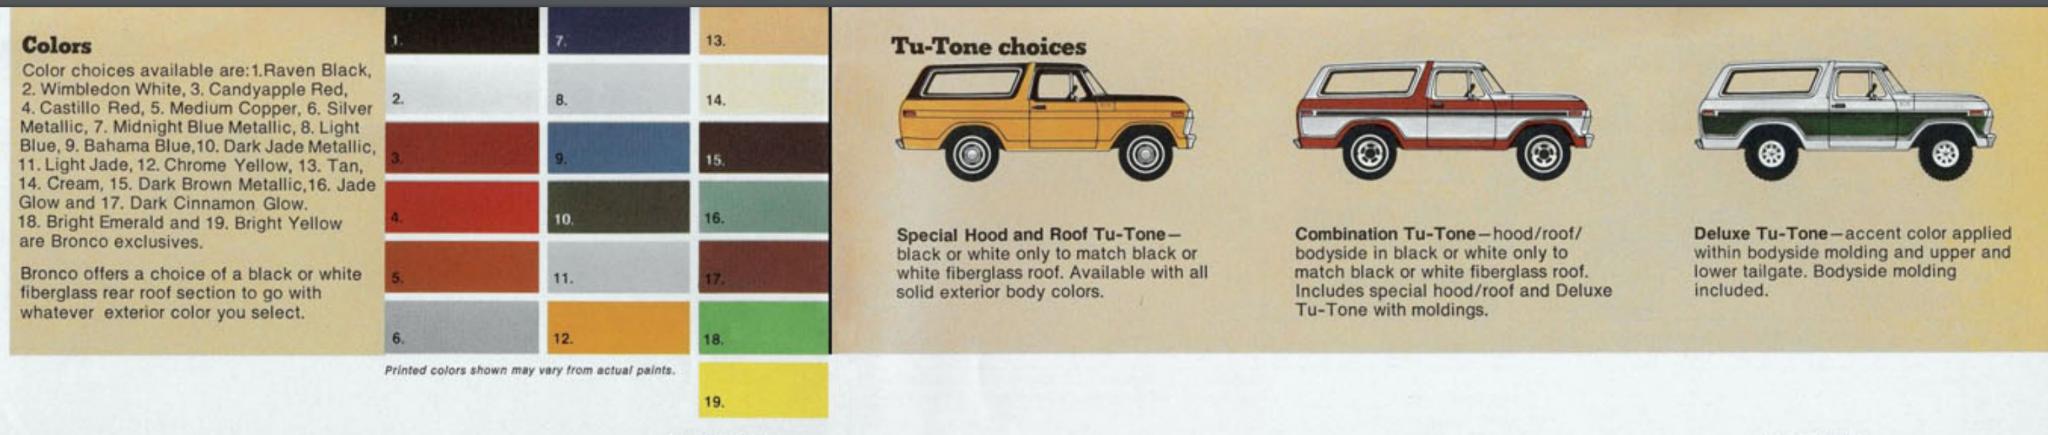 1978 Ford Bronco color shades for the exterior of the vehicle